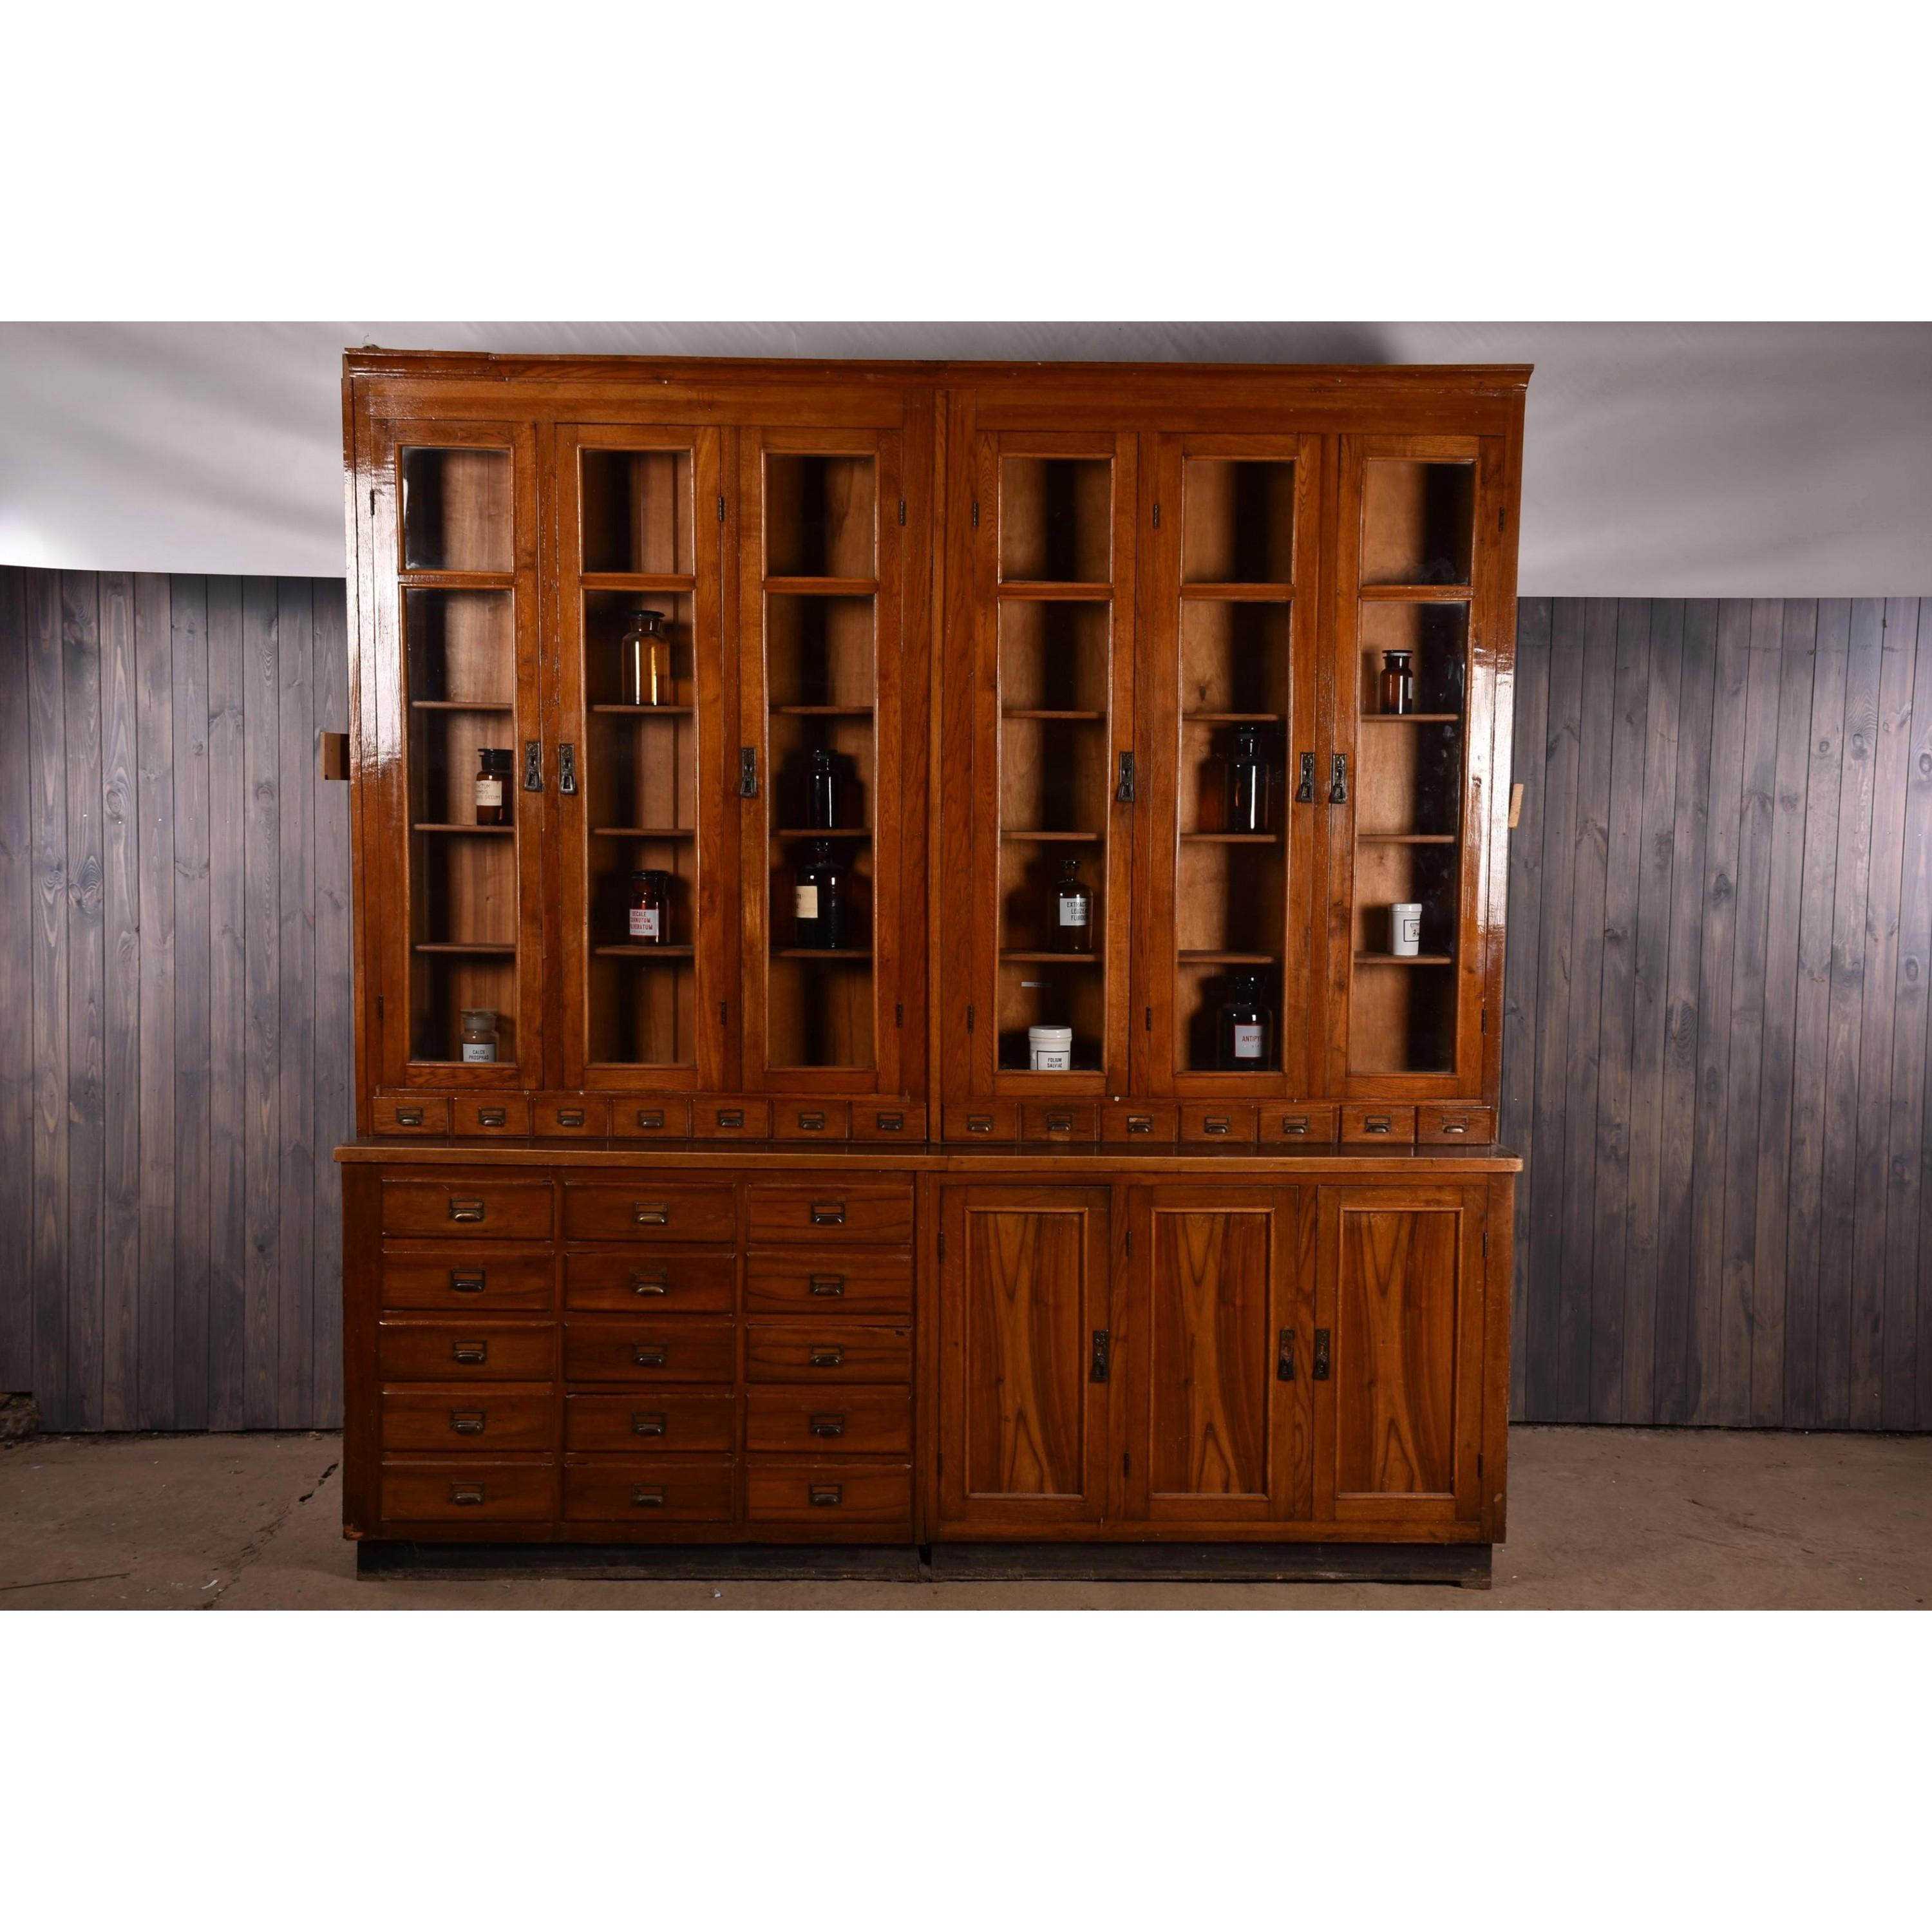 Apothecary No.8


Apothecary display cabinet circa 1930s Number 8
Apothecary / Pharmacy / Chemist / Shop Display / Restaurant cabinet circa 1930s

Large Apothecary Pharmacy beech display cabinet dating to circa 1930s, This piece is one of